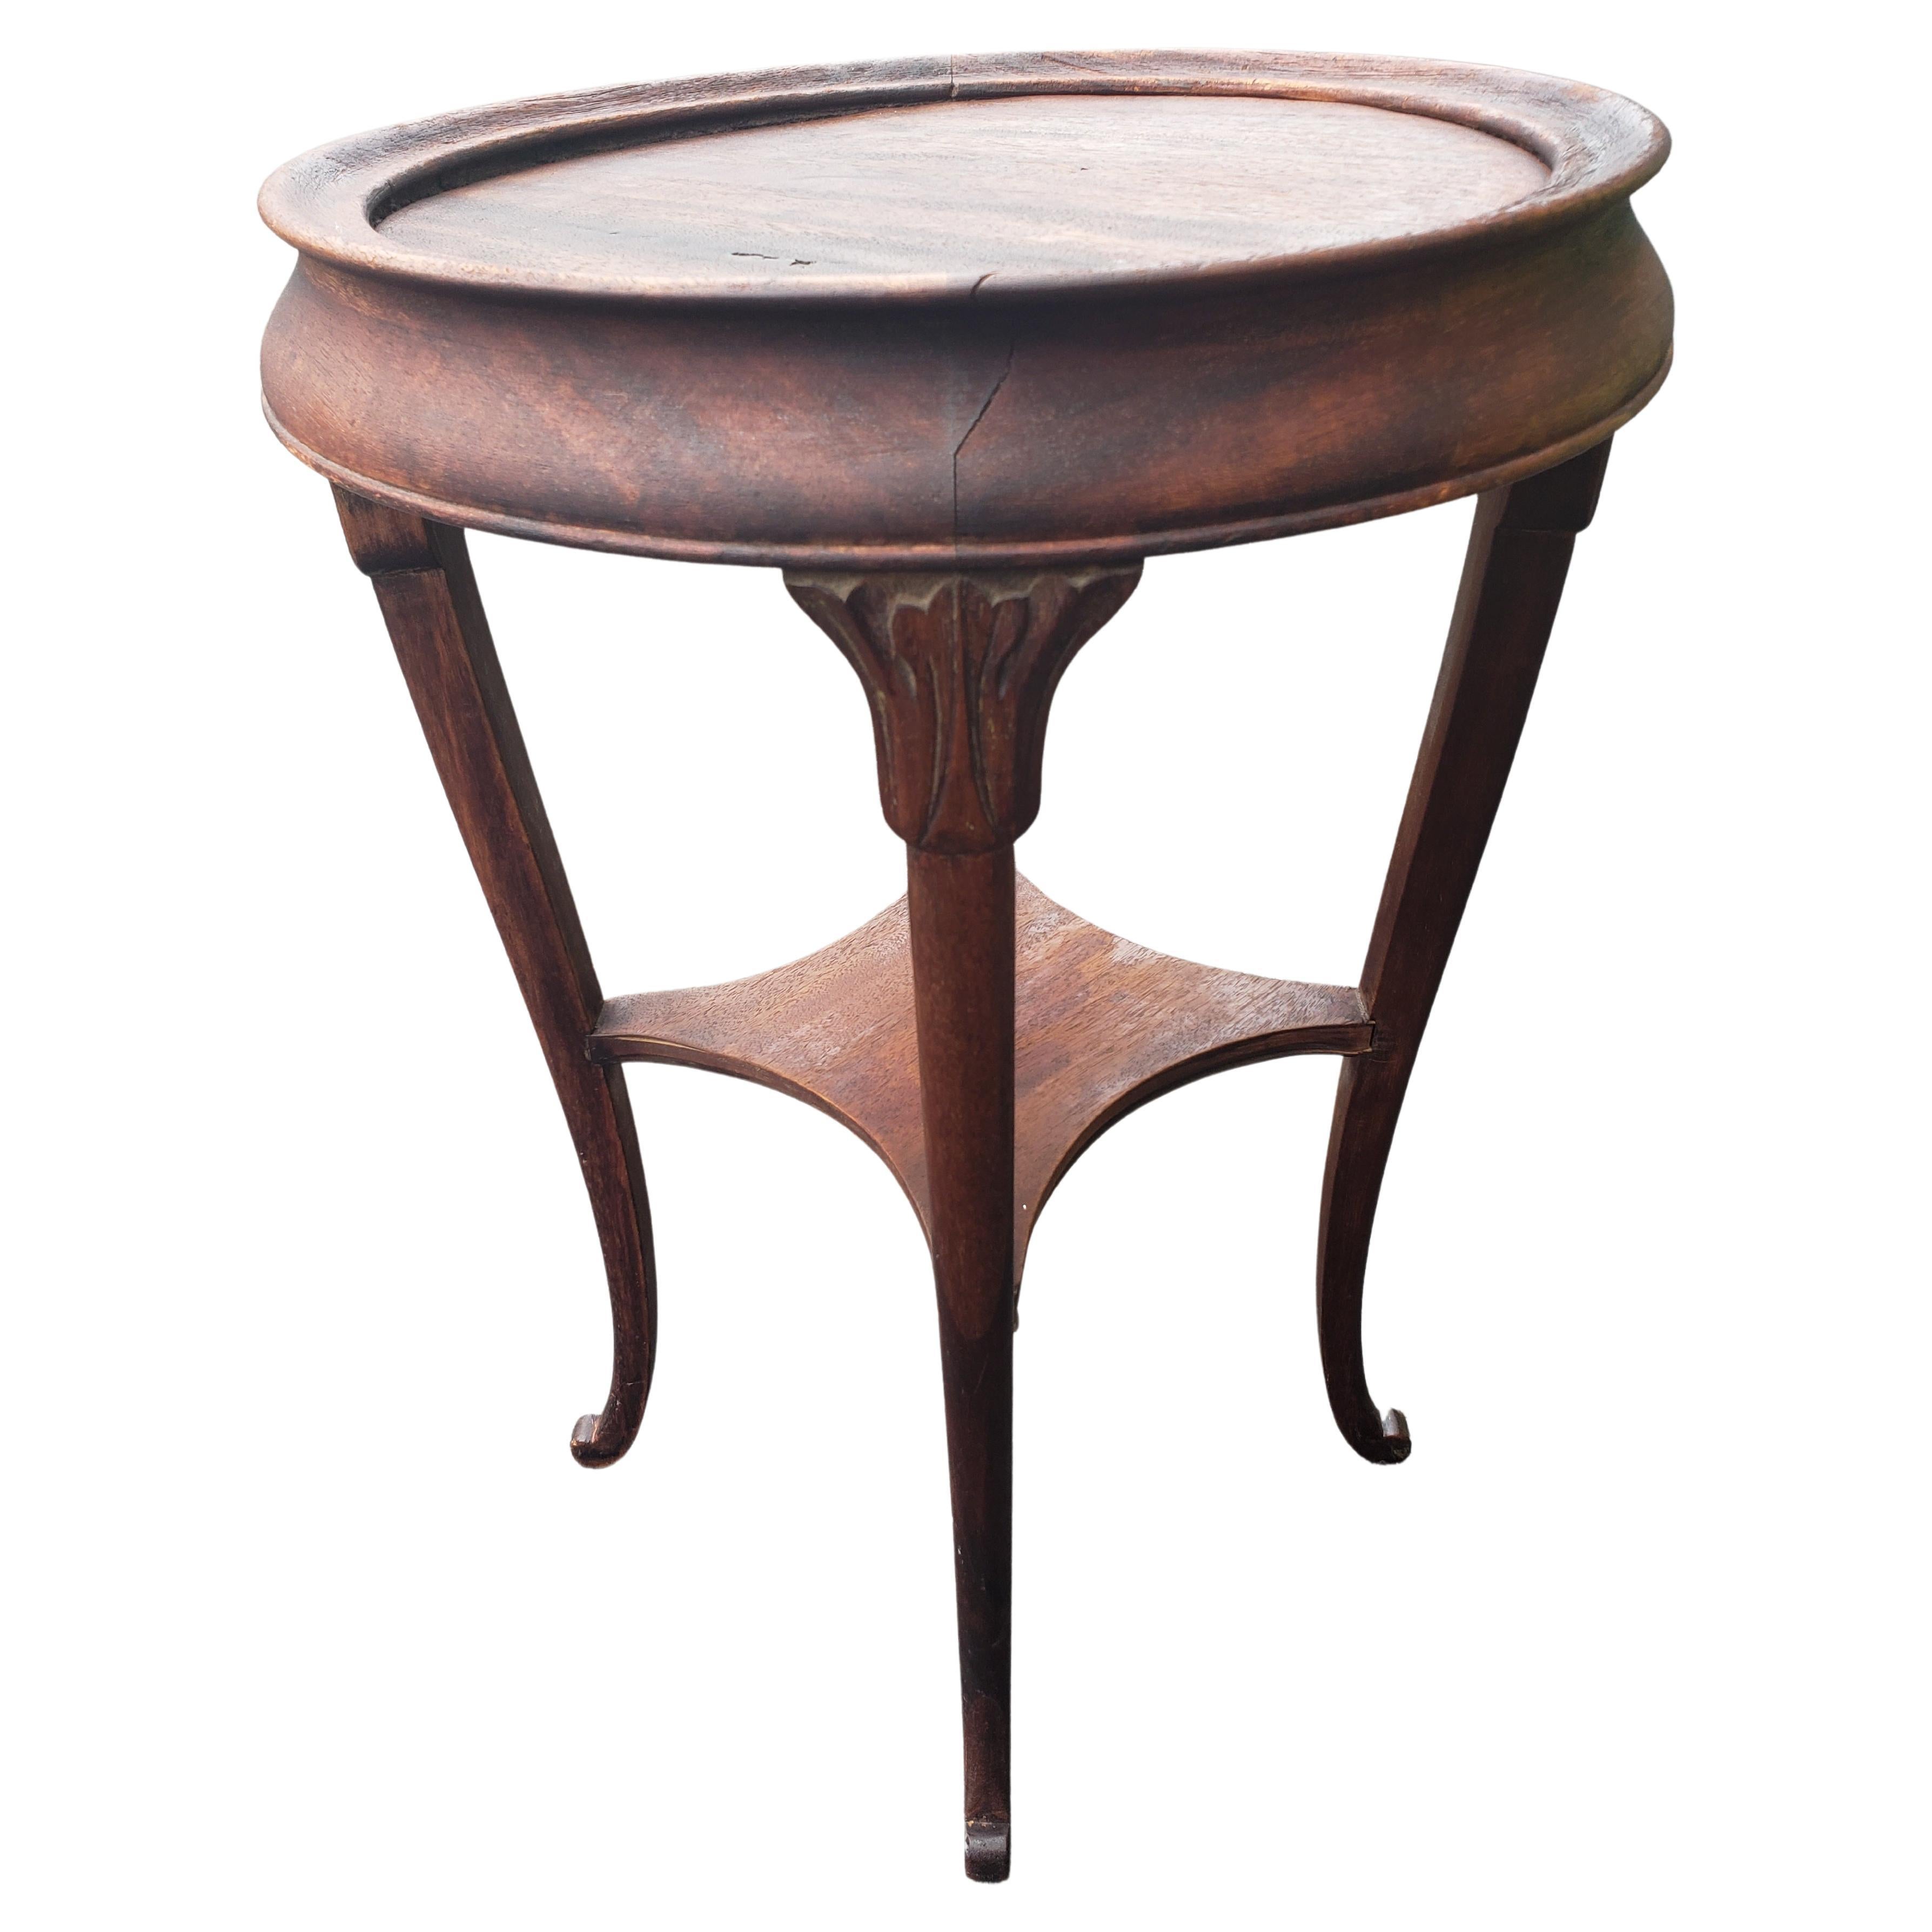 Antique Mahogany round parlor lamp table two tier large plant stand, C 1900s.

Very steady. No wiggles. Wear appropriate with age and use. 

Measures: 16 inches in diameter x 24 inches tall

W5